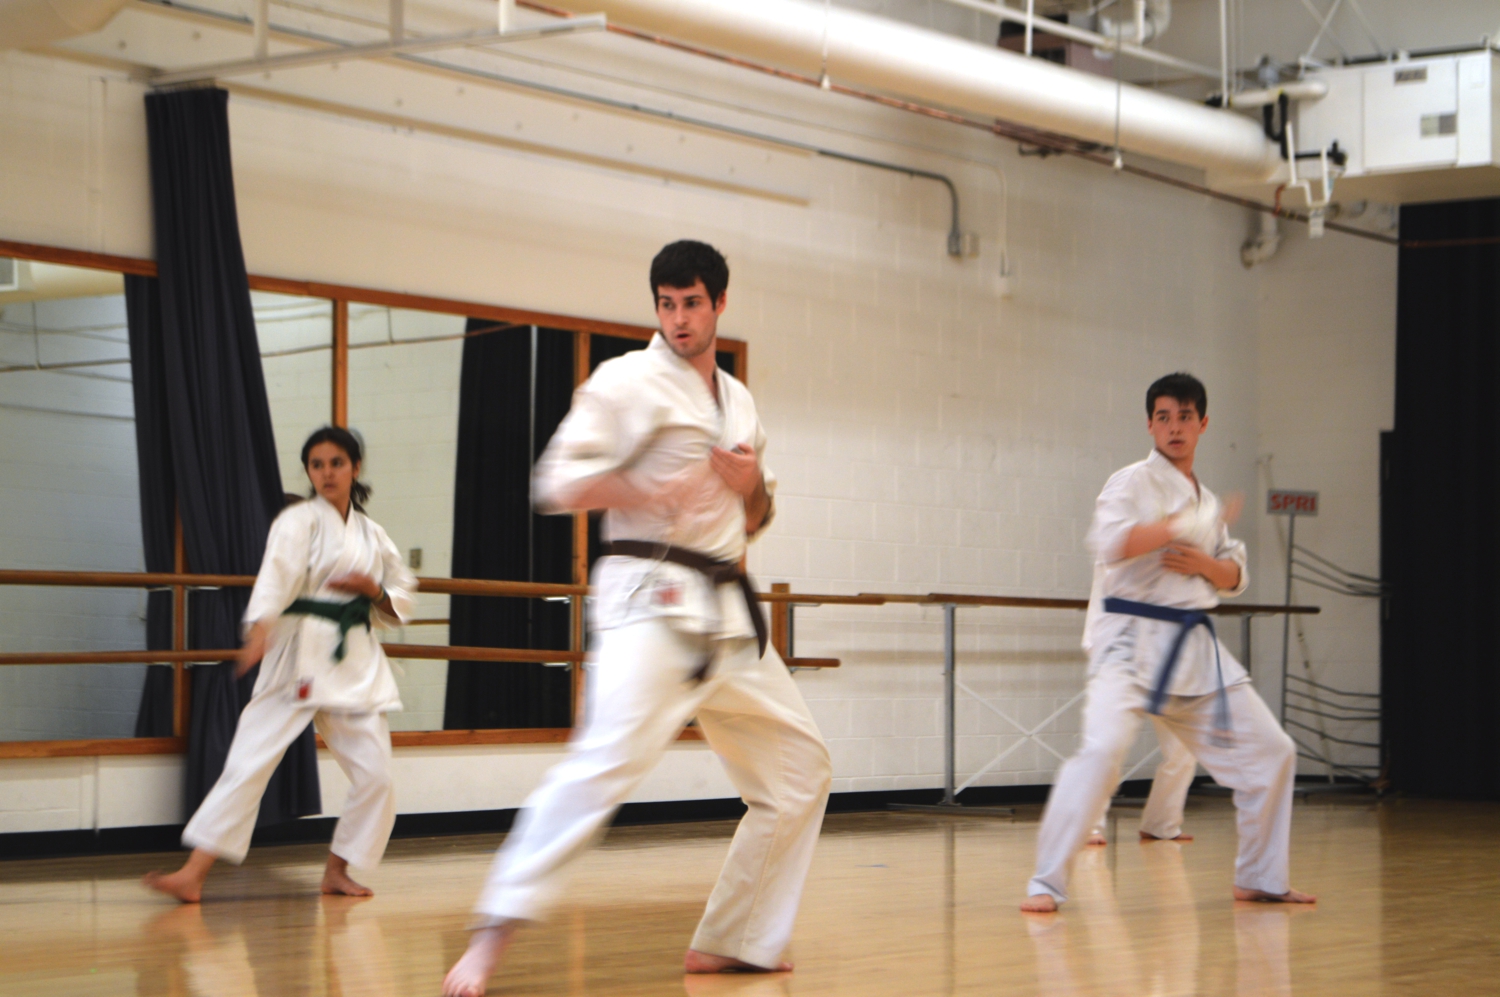 Occidental karate team earns silver and bronze medals at tournaments in